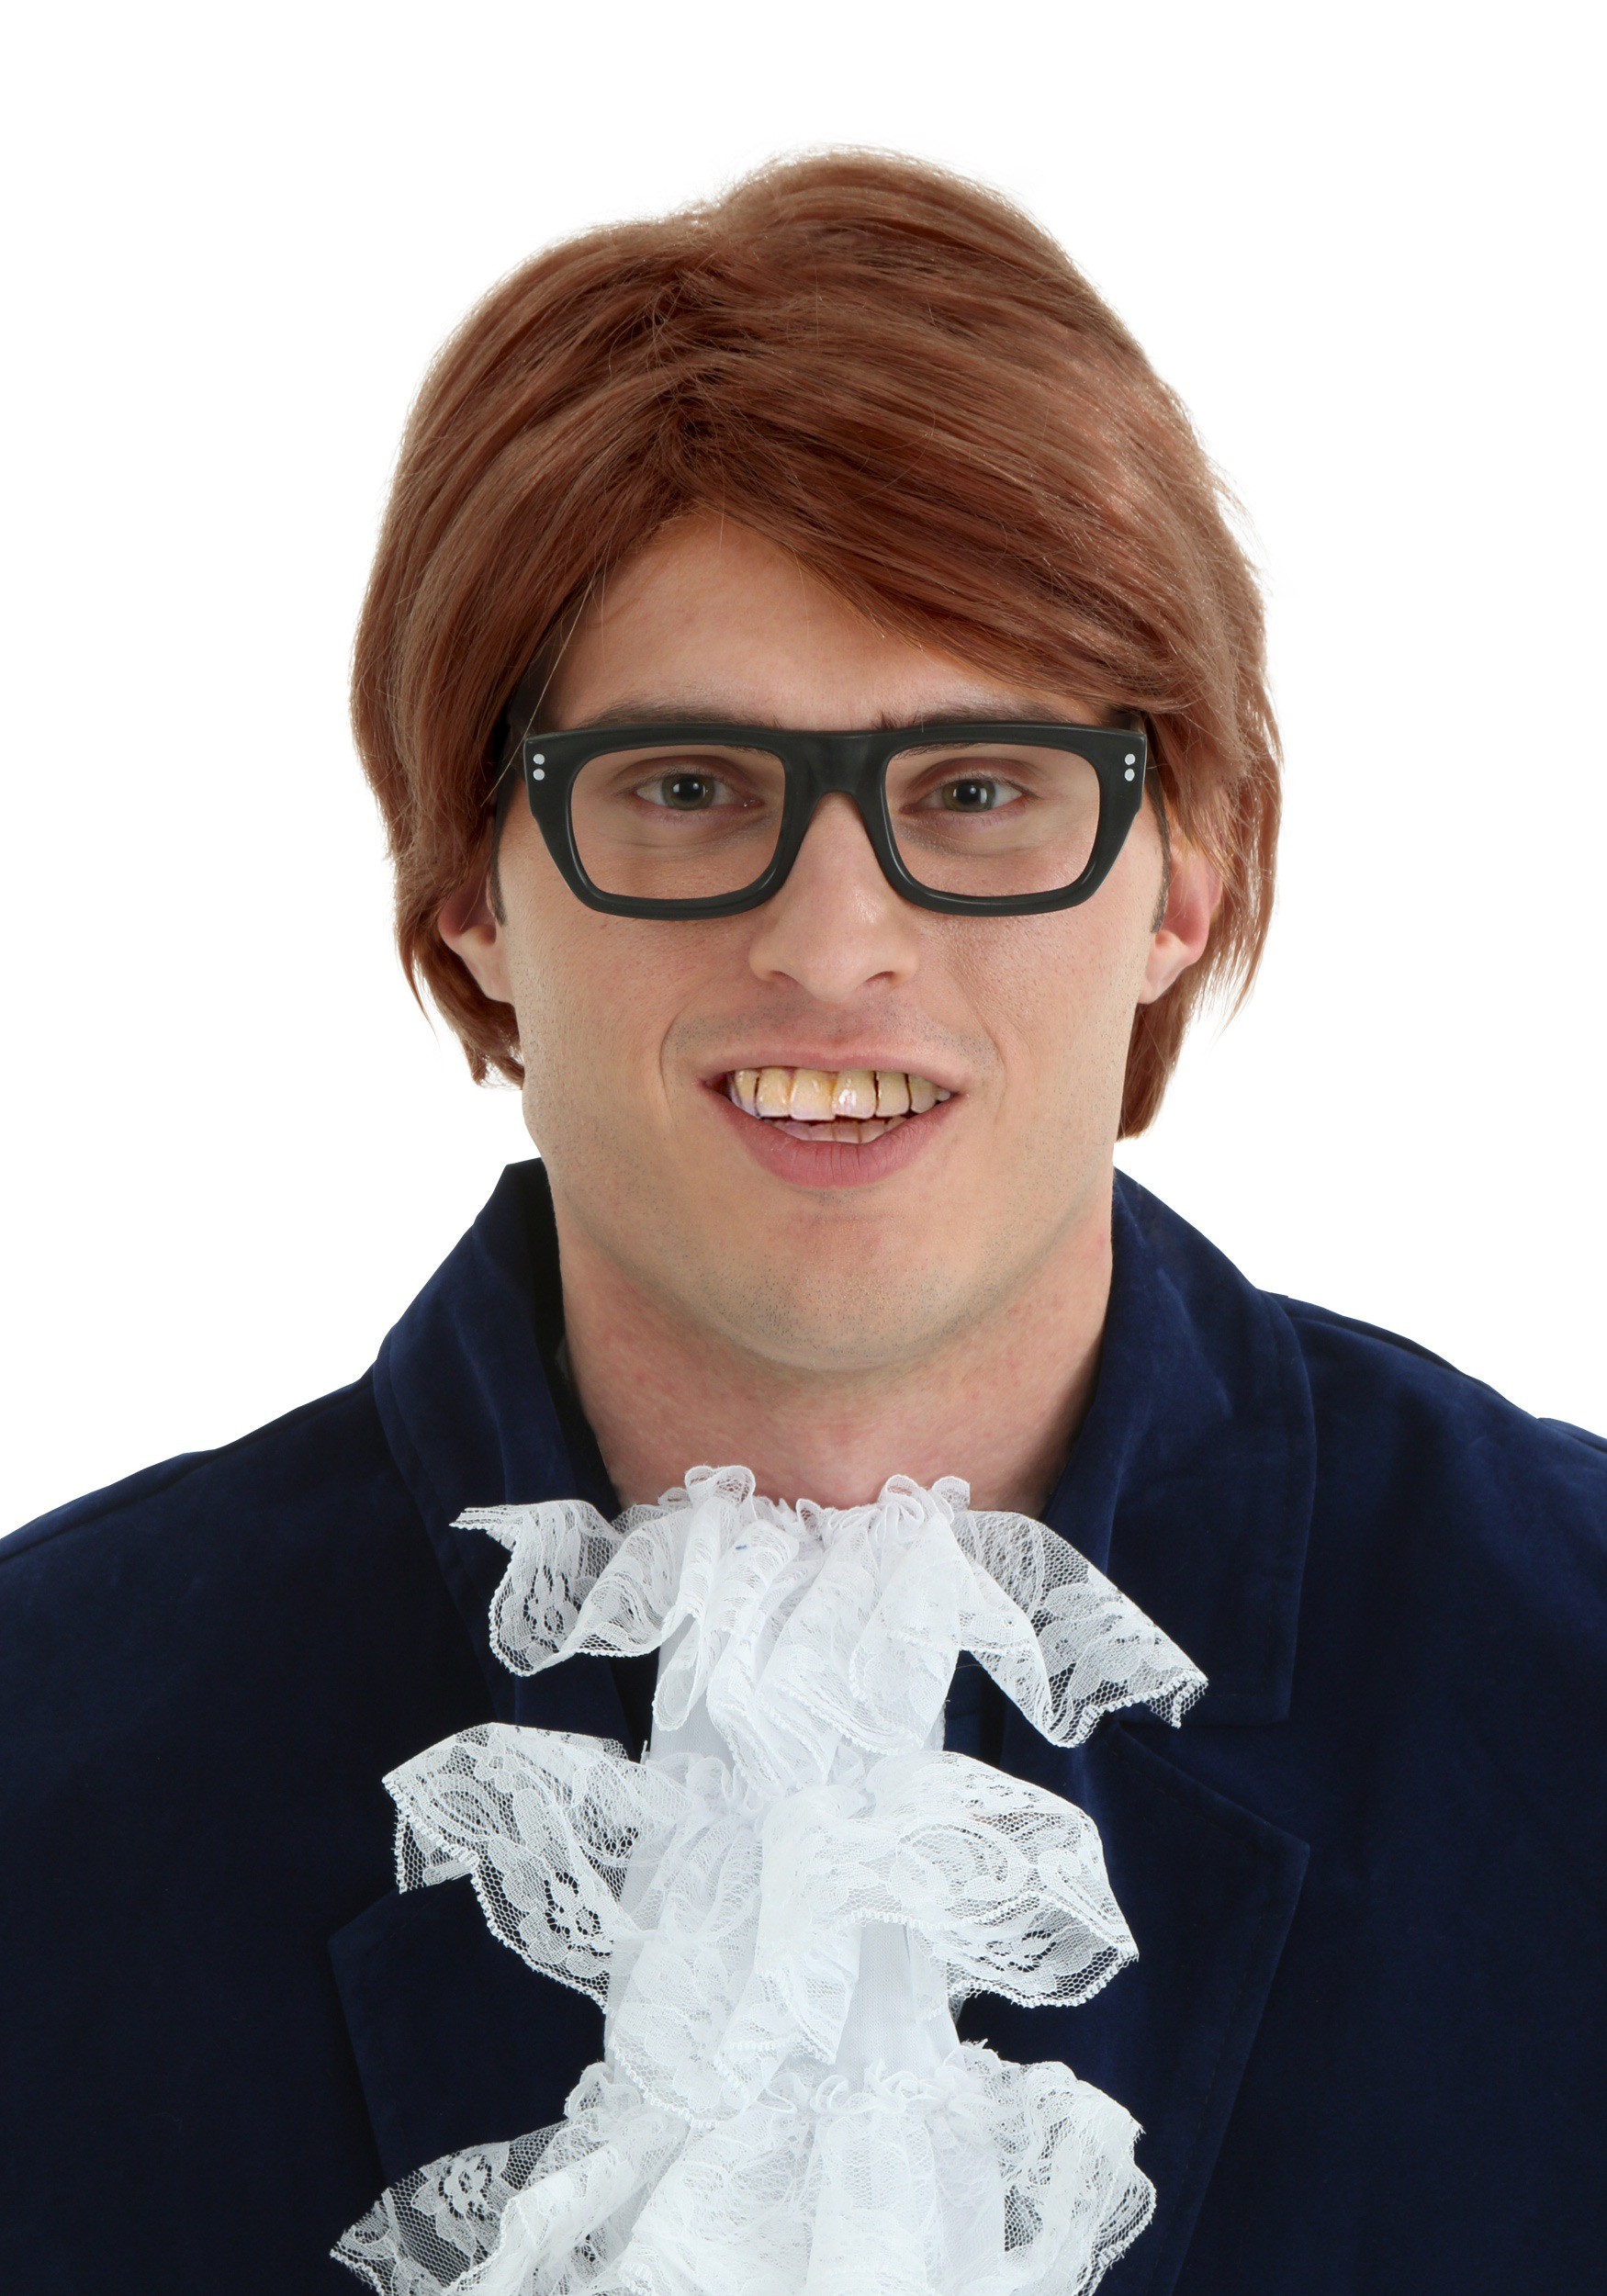 60s Swinger Deluxe Wig for Adults | Austin Powers Costumes